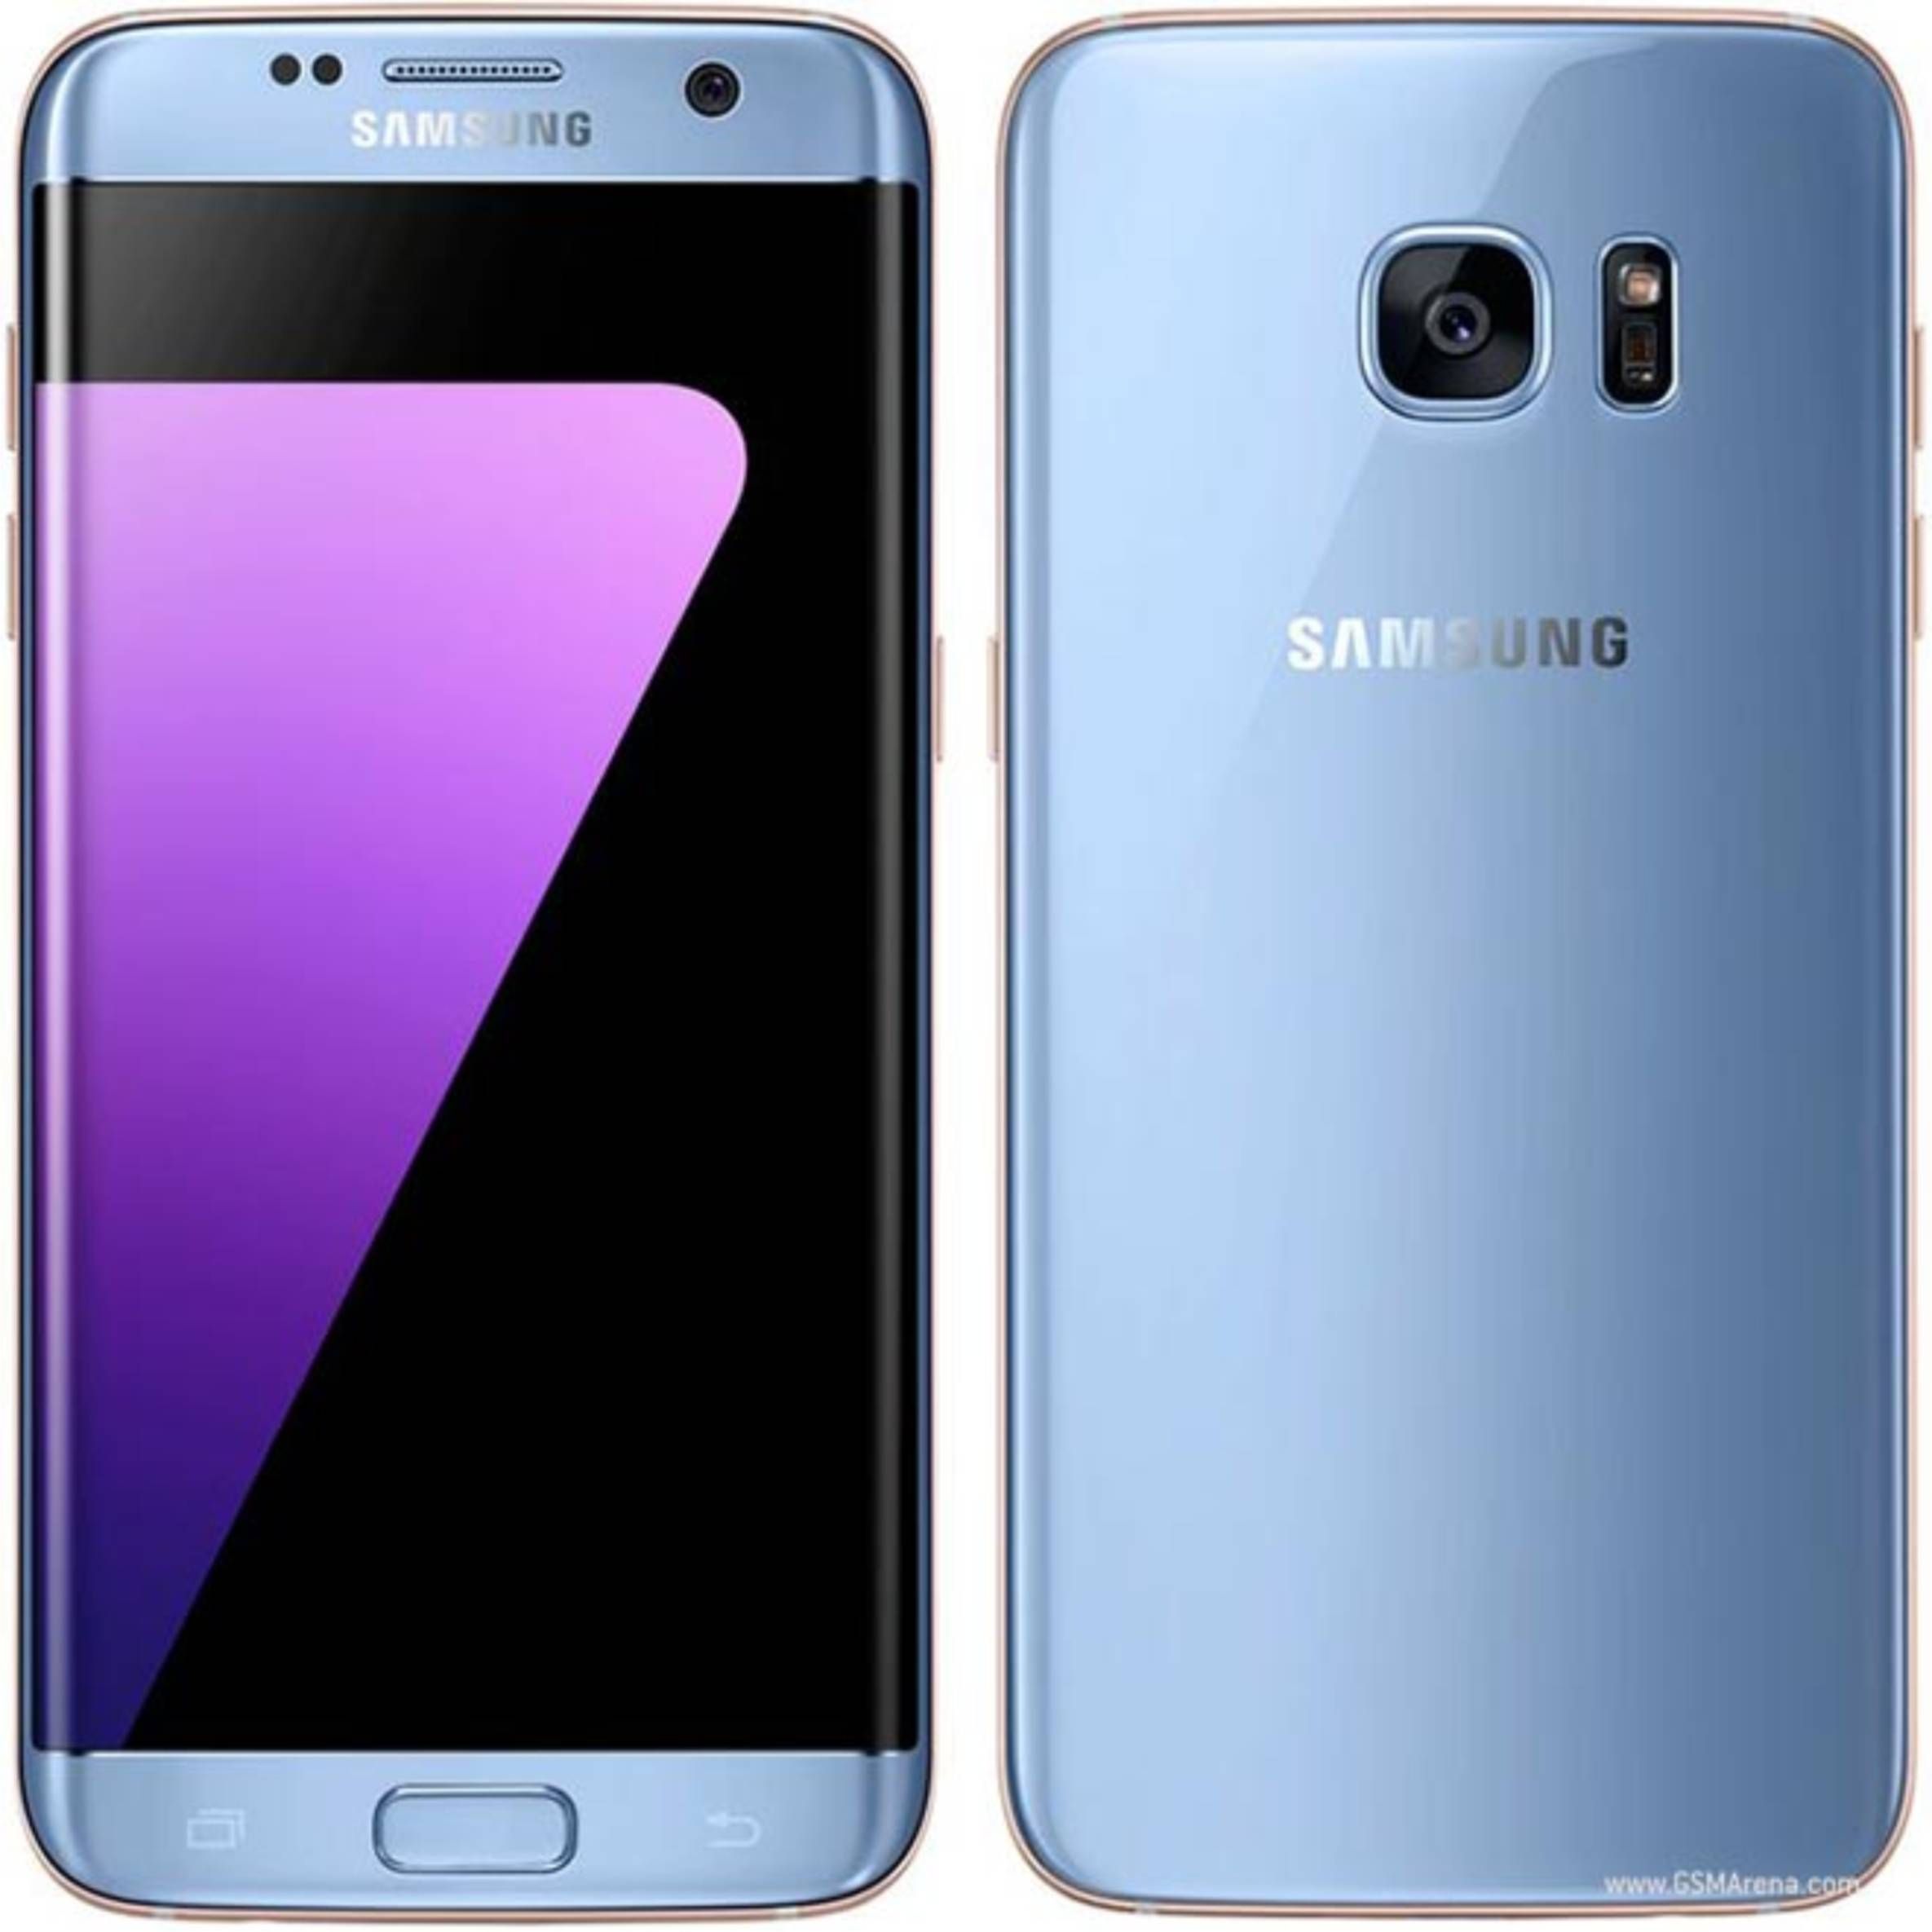 What is Samsung Galaxy S7 Edge Screen Replacement Cost in Nairobi?